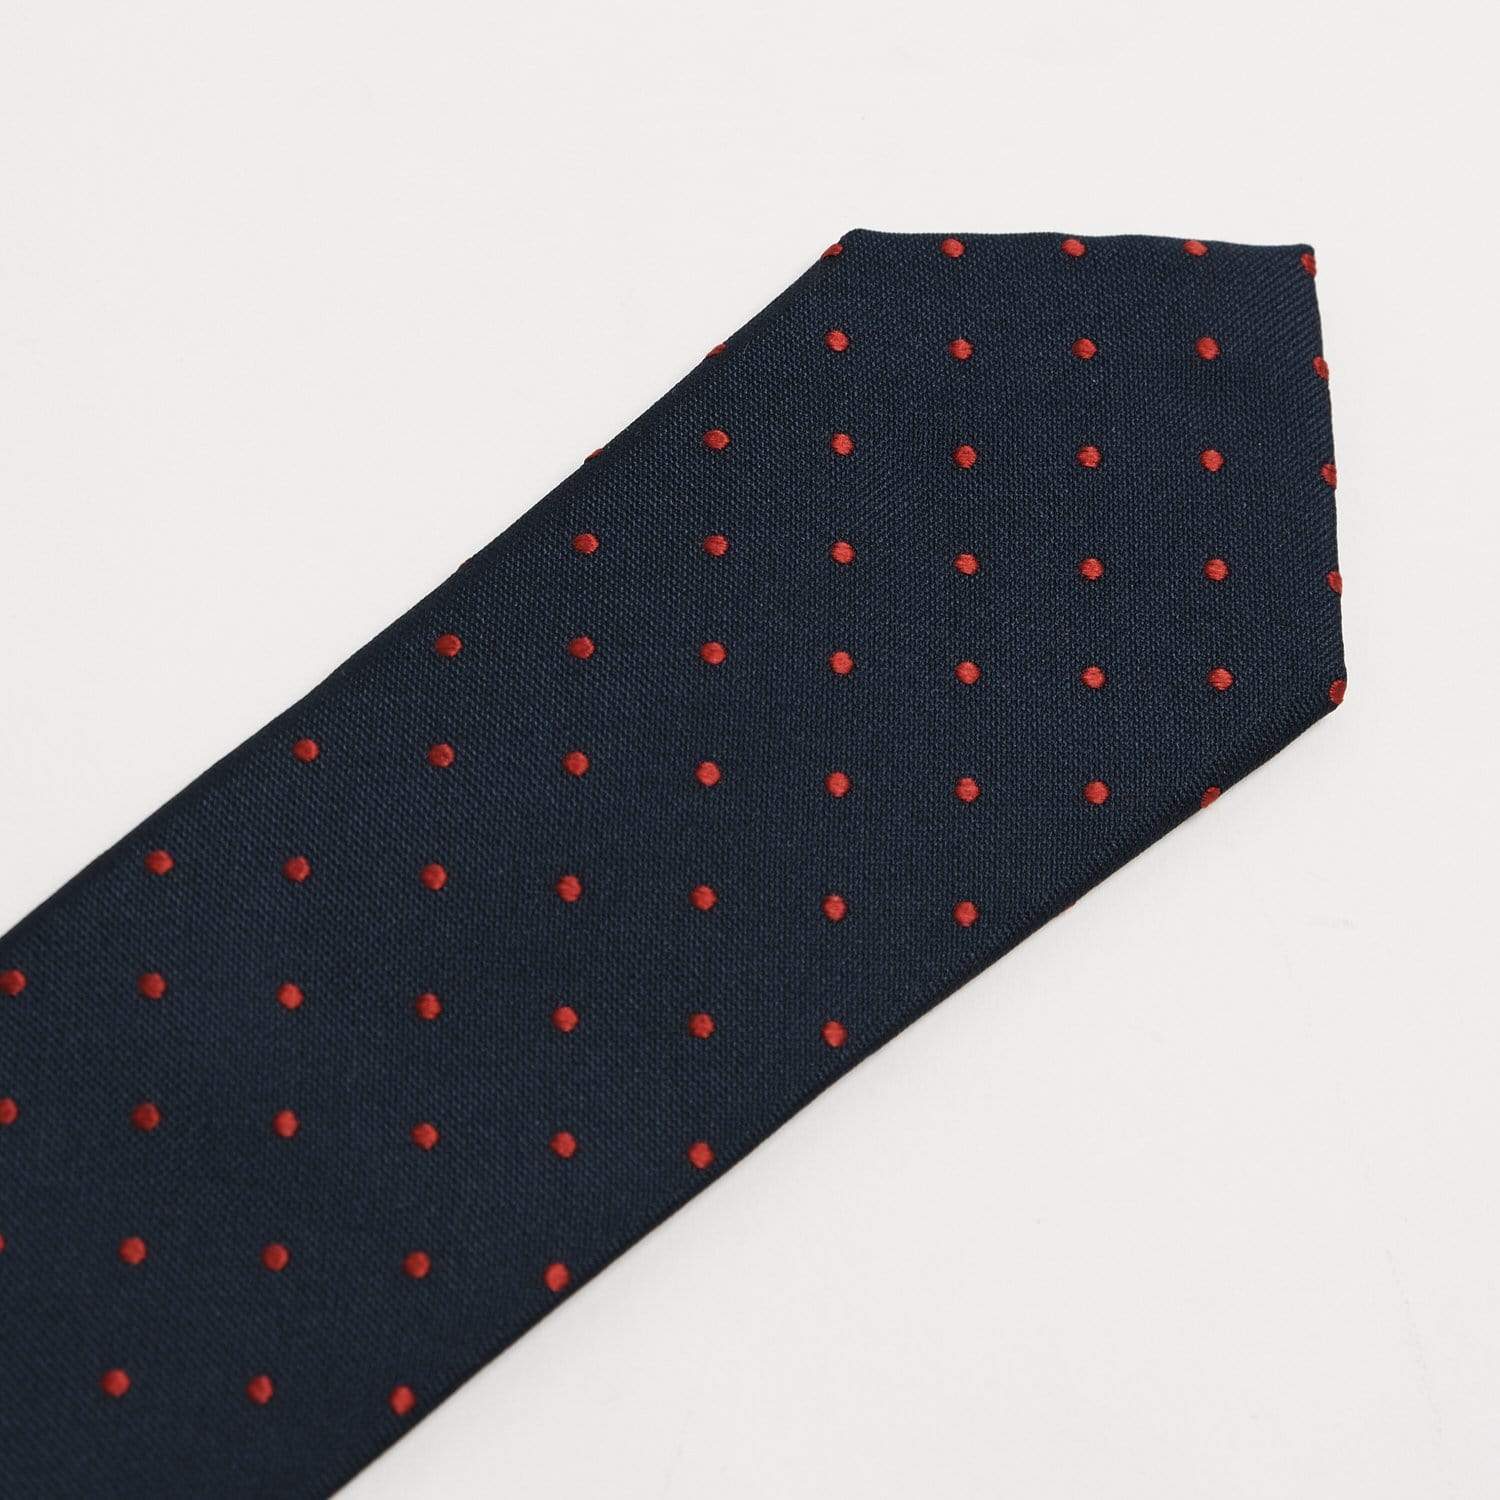 T.M.Lewin-Spaced-Spot-Tie-Navy-and-Red-63399-008